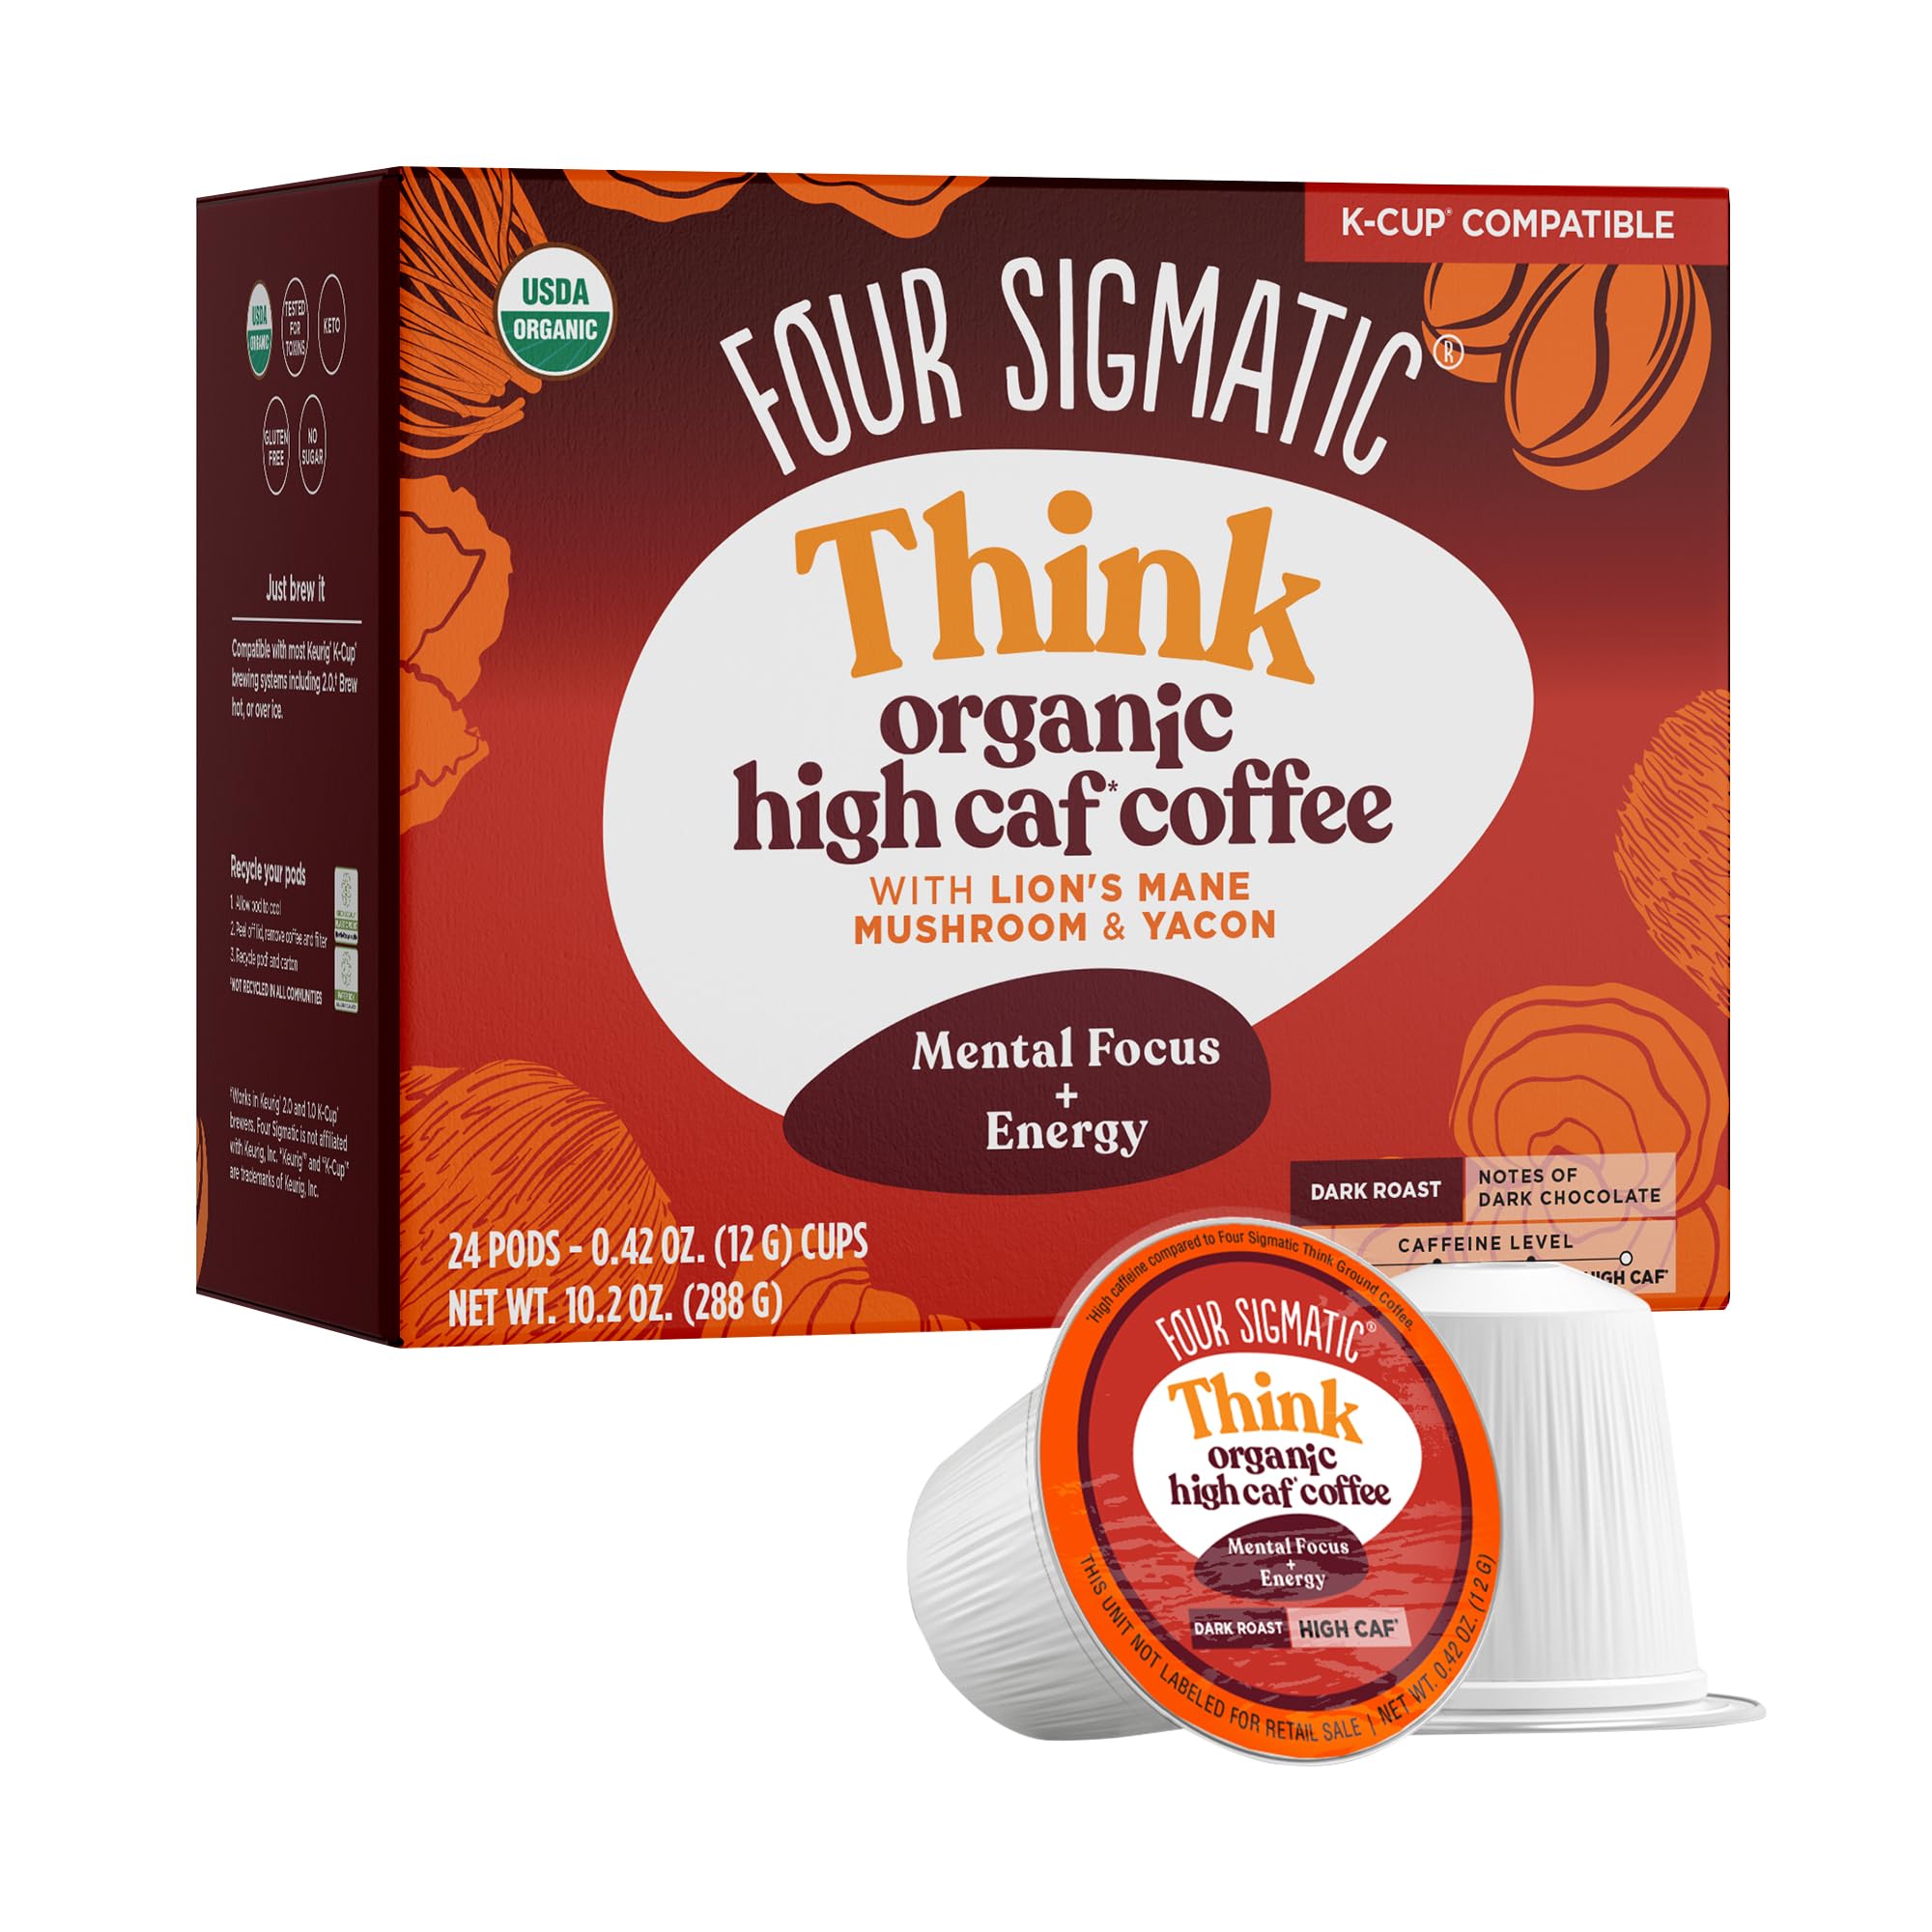 High Caffeine Mushroom Coffee K-Cups by Four Sigmatic, 24 count for $20.99 with S&S Amazon